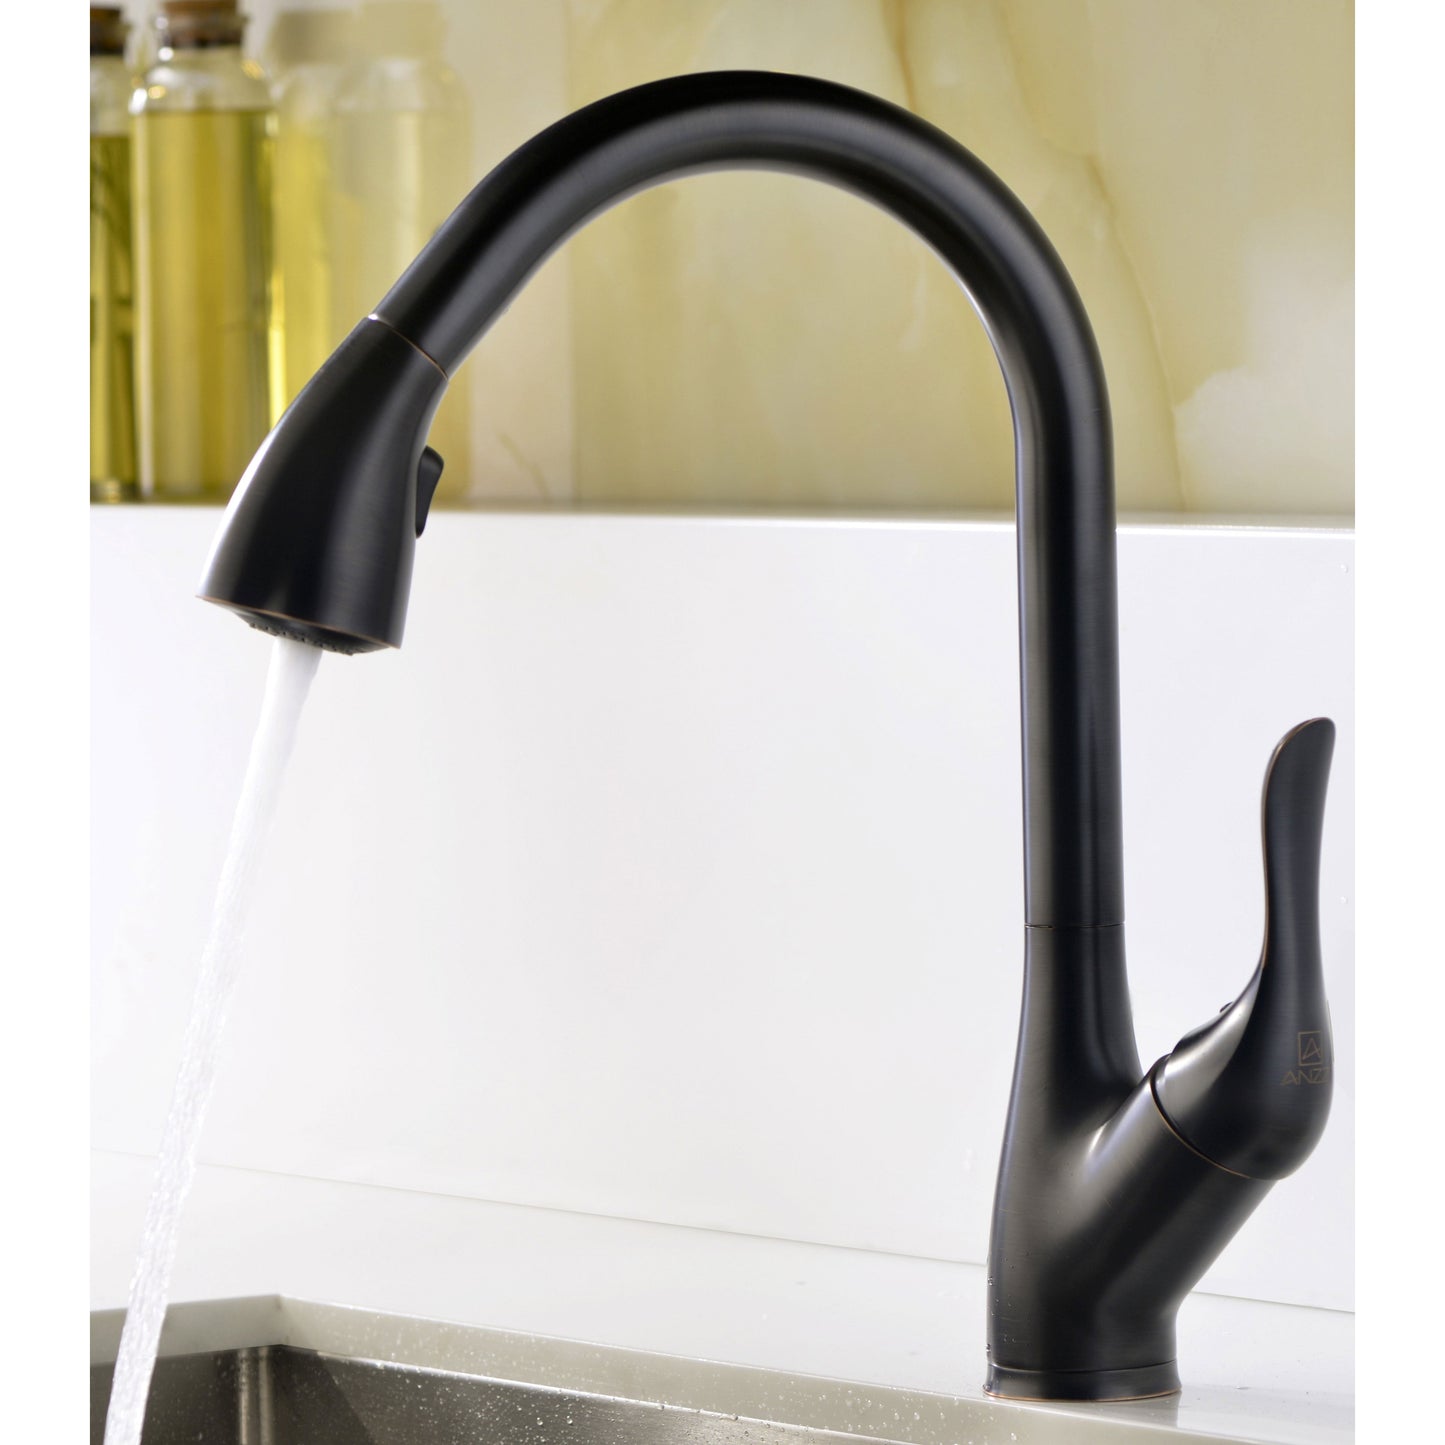 ANZZI Elysian Series 33" Double Basin 60/40 Stainless Steel Farmhouse Kitchen Sink With Strainer and Oil Rubbed Bronze Accent Faucet